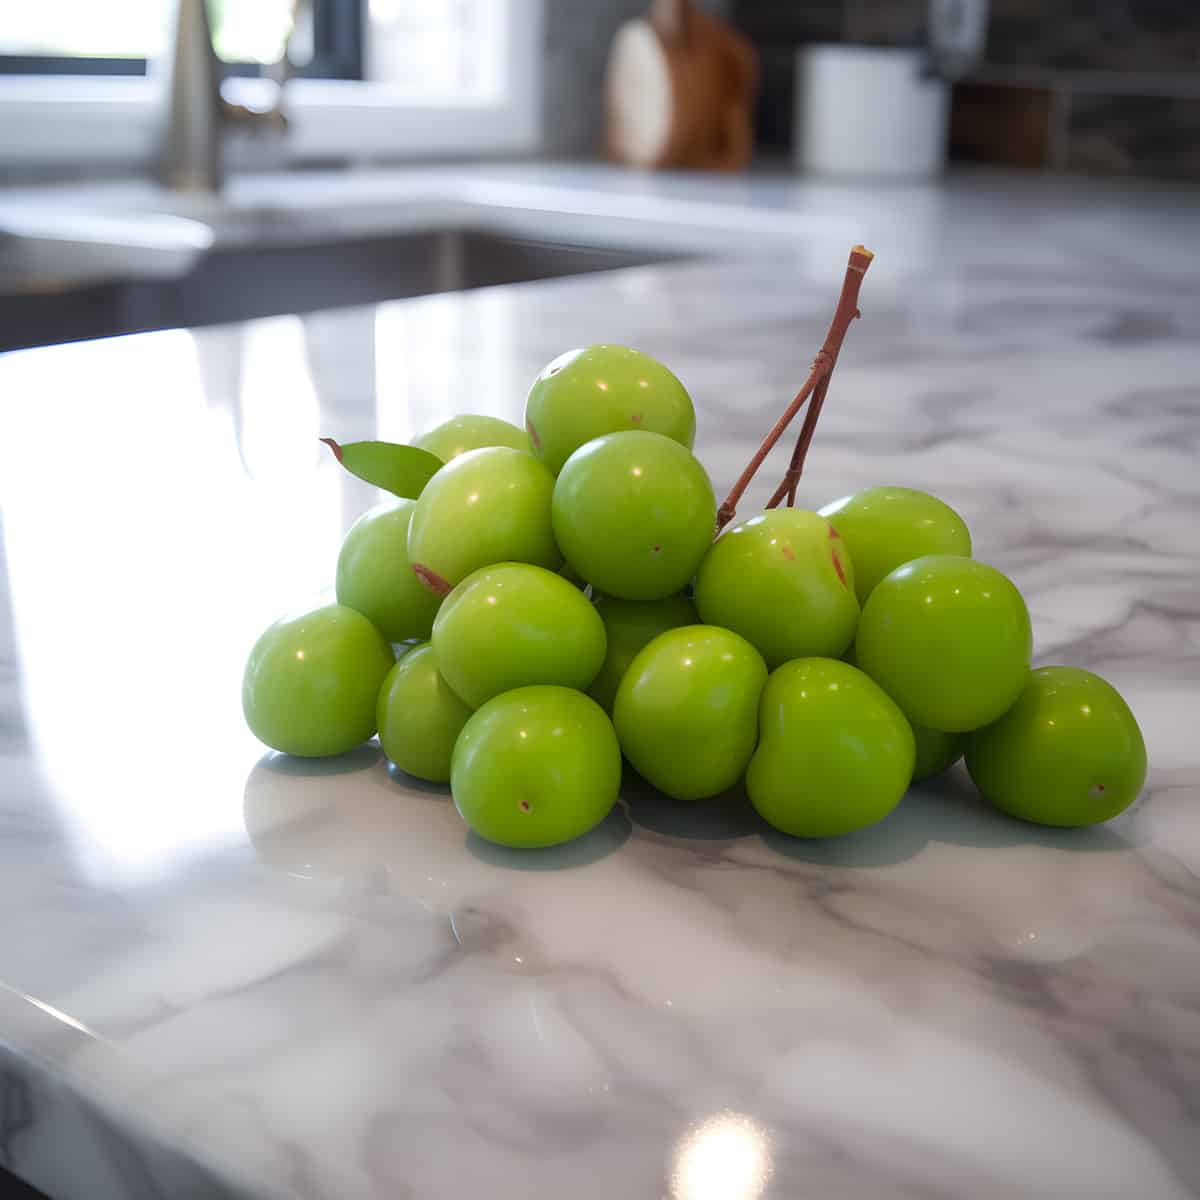 Sour Plum on a kitchen counter